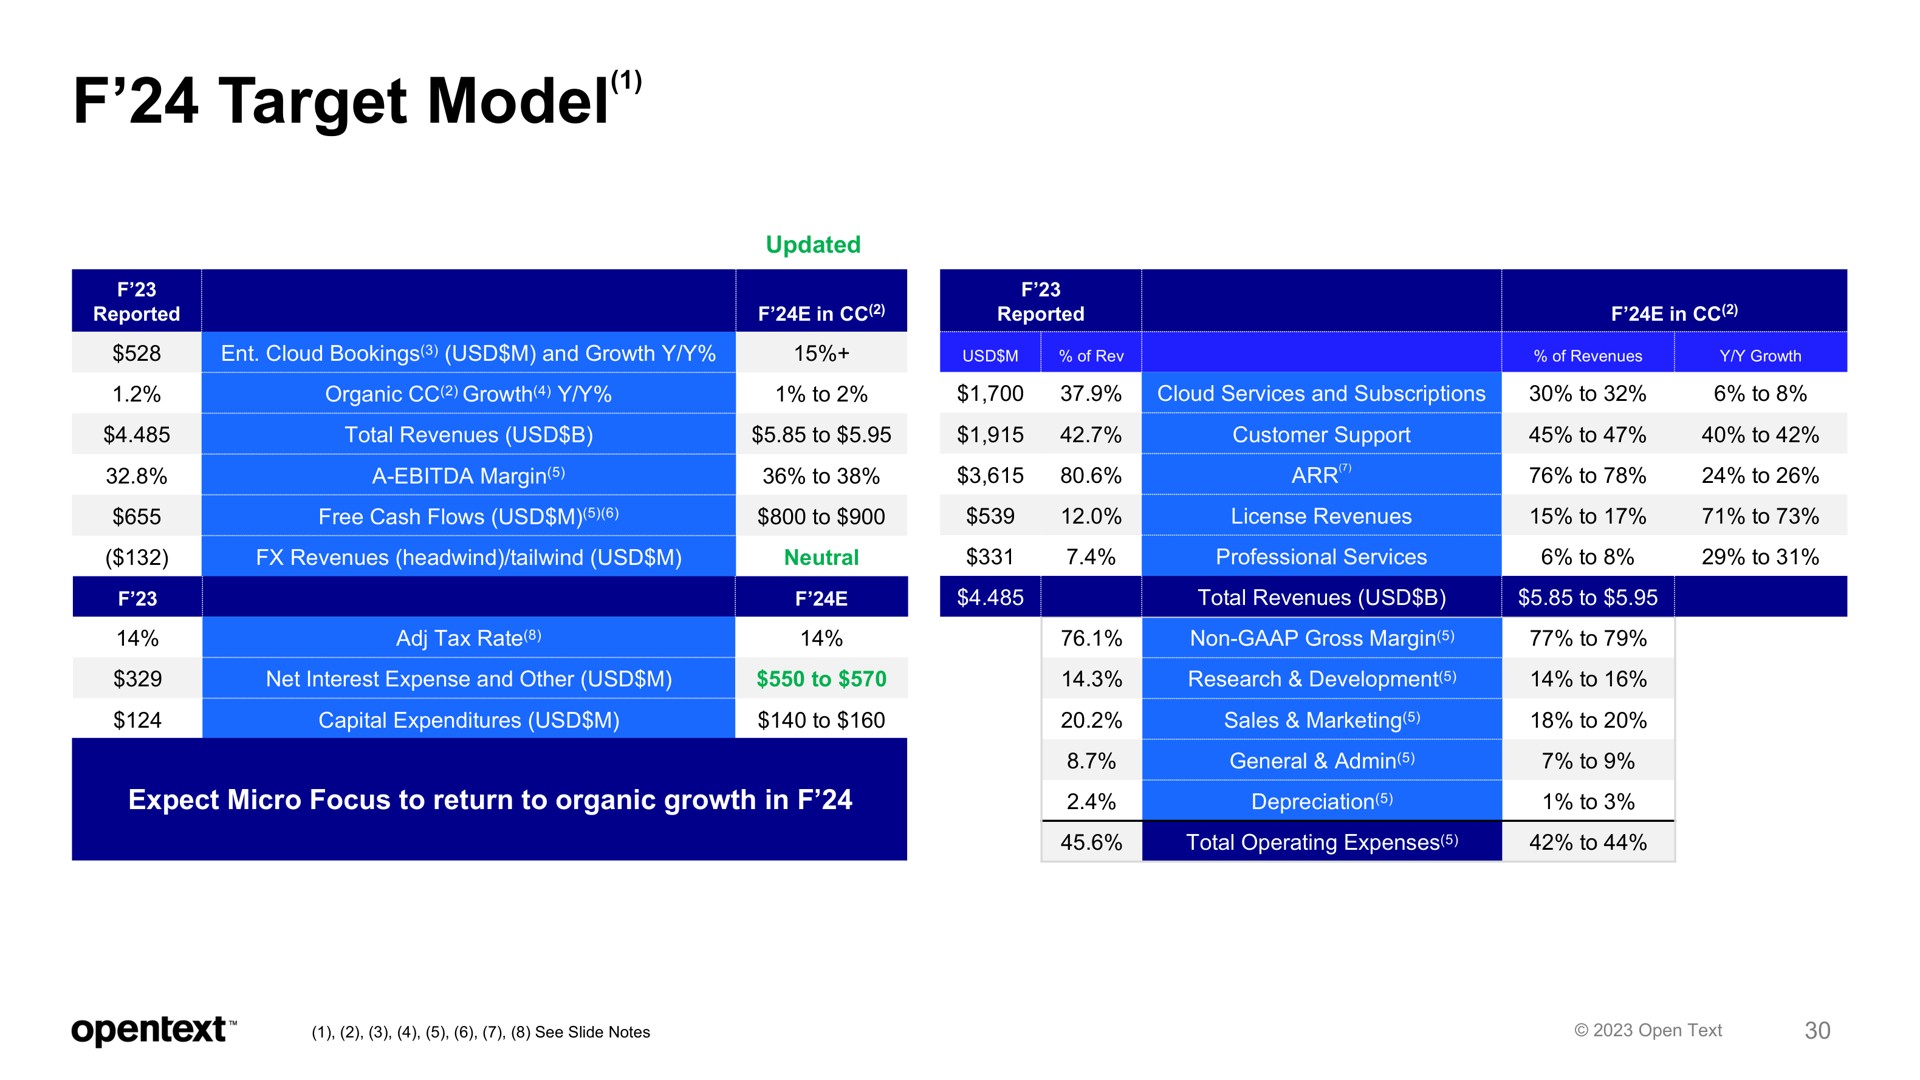 target model medium term aspirations in constant currency | OpenText